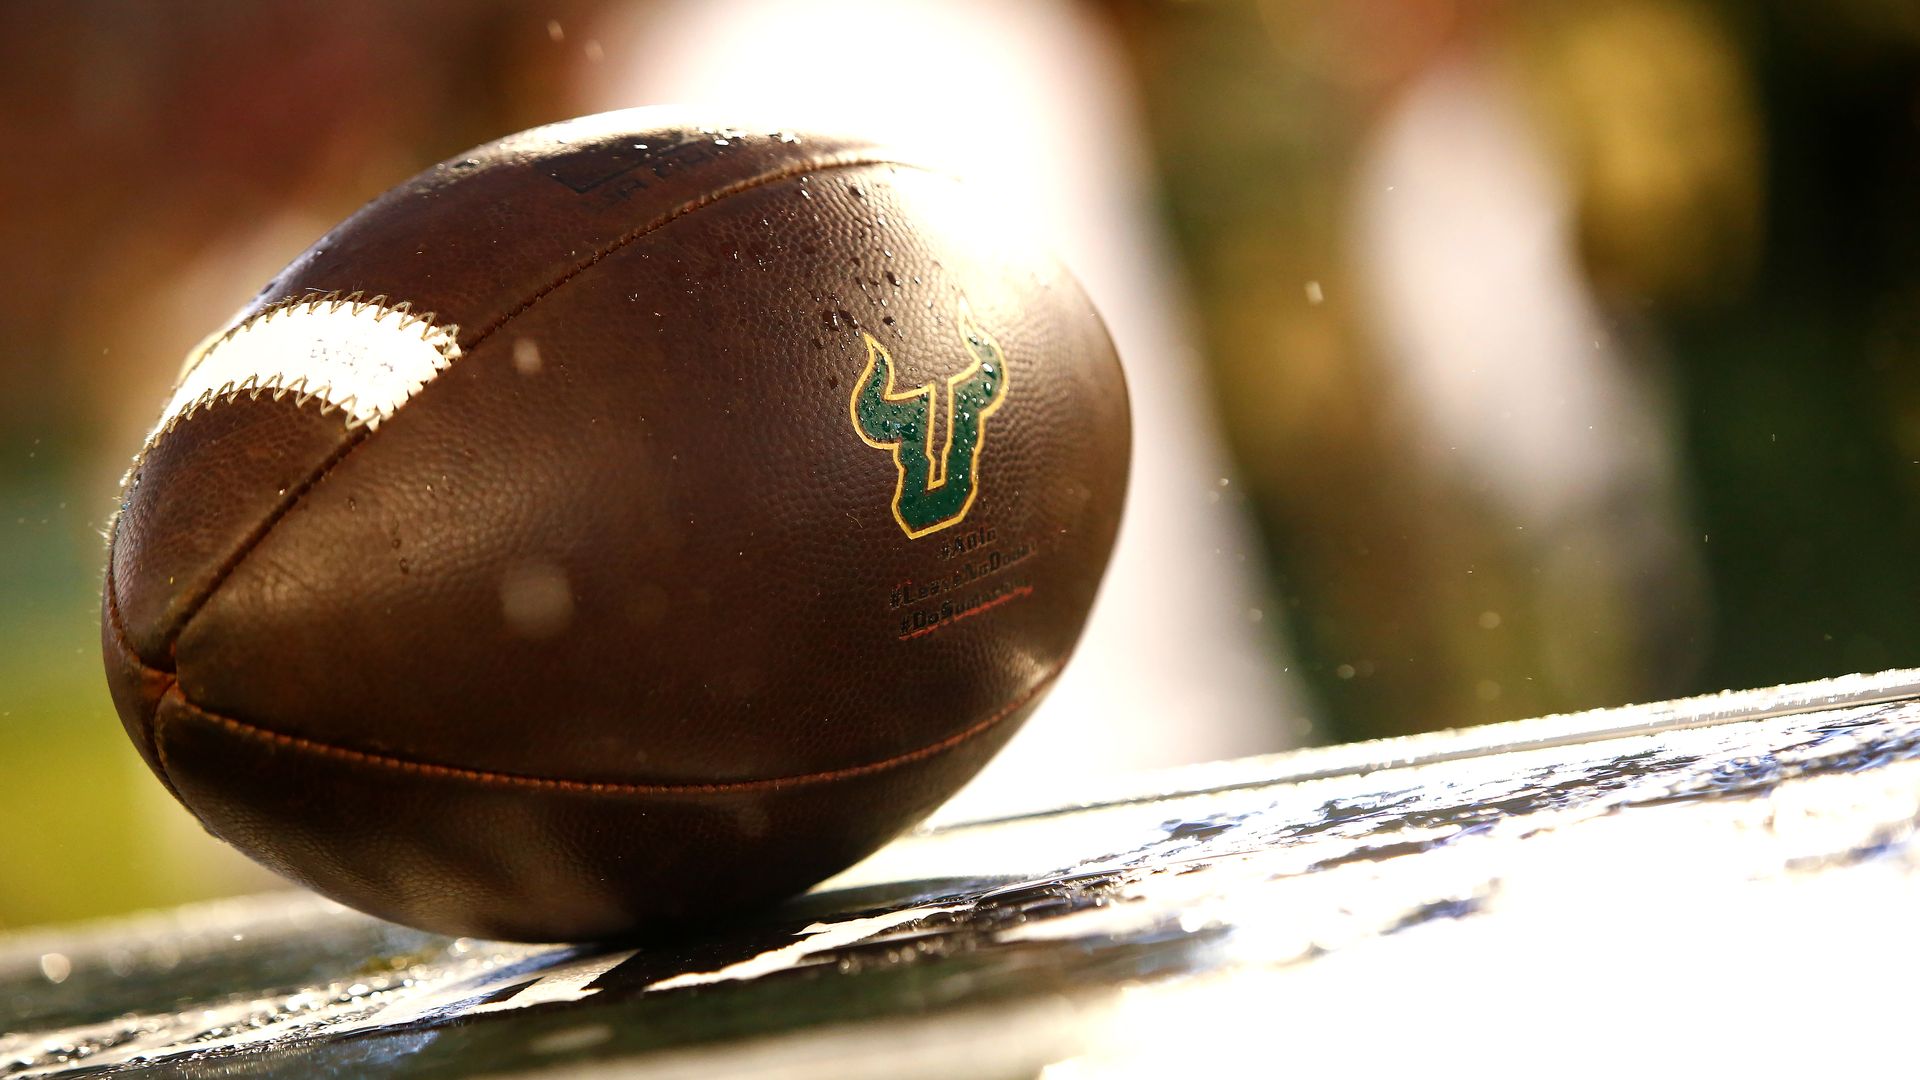  A football adorned with the South Florida Bulls logo sits on a crate on the sidelines.